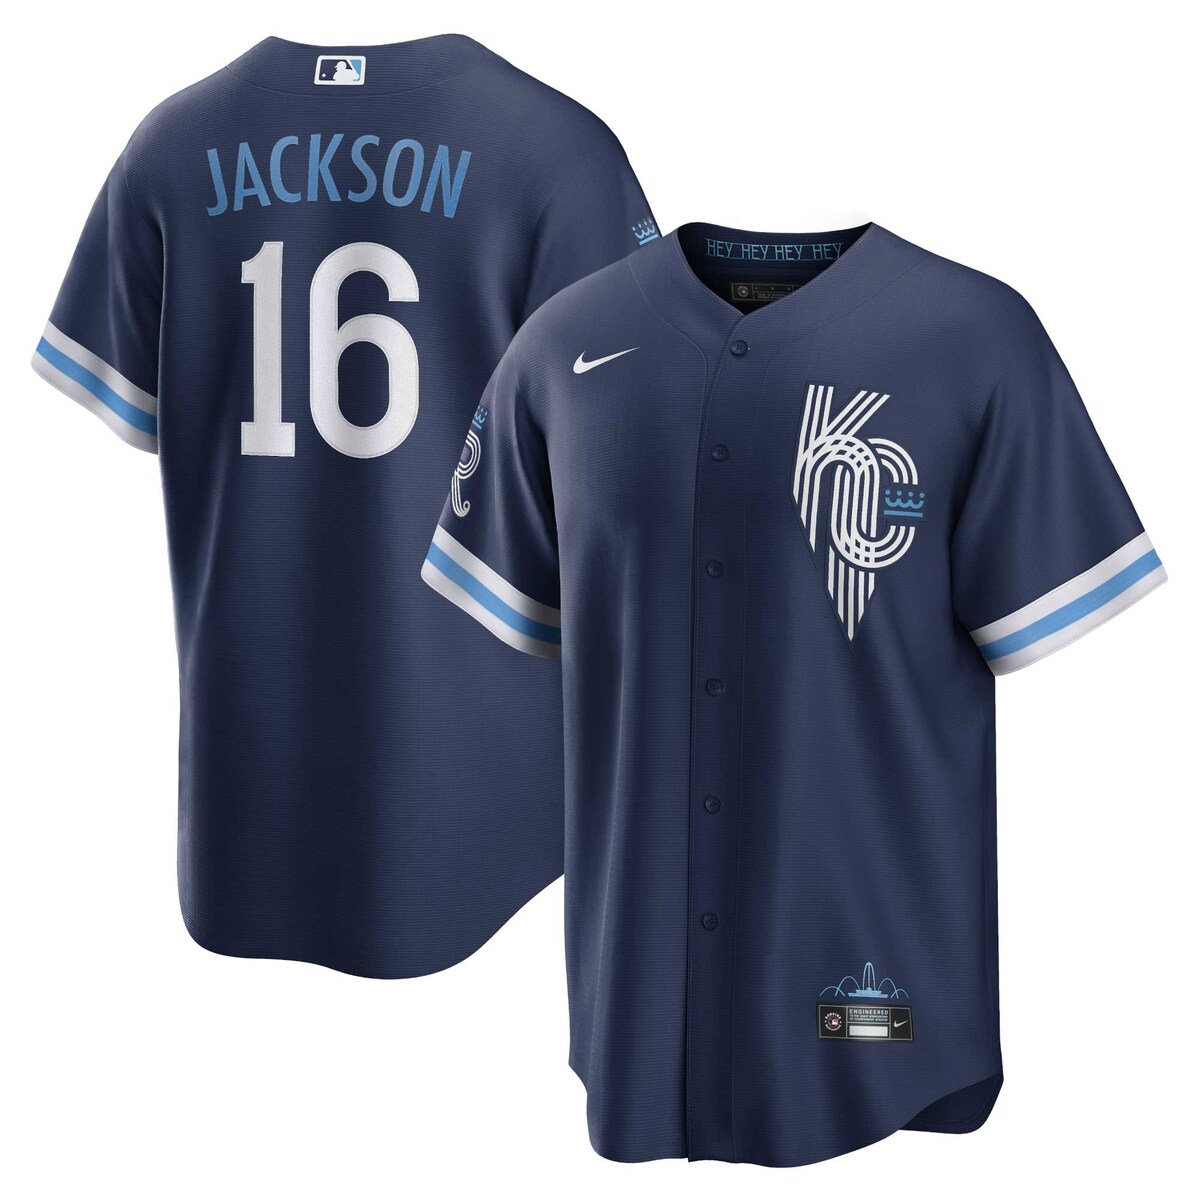 This special City Connect Royals Bo Jackson Replica jersey from Nike is inspired by Kansas City's most common nickname, "City of Fountains," claiming to have more fountains than any other in the world. The colorway is a nod to the ritual of dying the fountains when the Kansas City Royals makes a playoff run. The uniform draws from prominent local icons and pays tribute to the beloved design of the city flag.Officially licensedMachine wash, tumble dry lowMaterial: 100% PolyesterHeat-sealed transfer appliqueRounded hemShort sleeveImportedEmbroidered graphicsHeat-sealed jock tagBrand: NikeMLB Batterman applique on center back neckReplica JerseyFull-button front